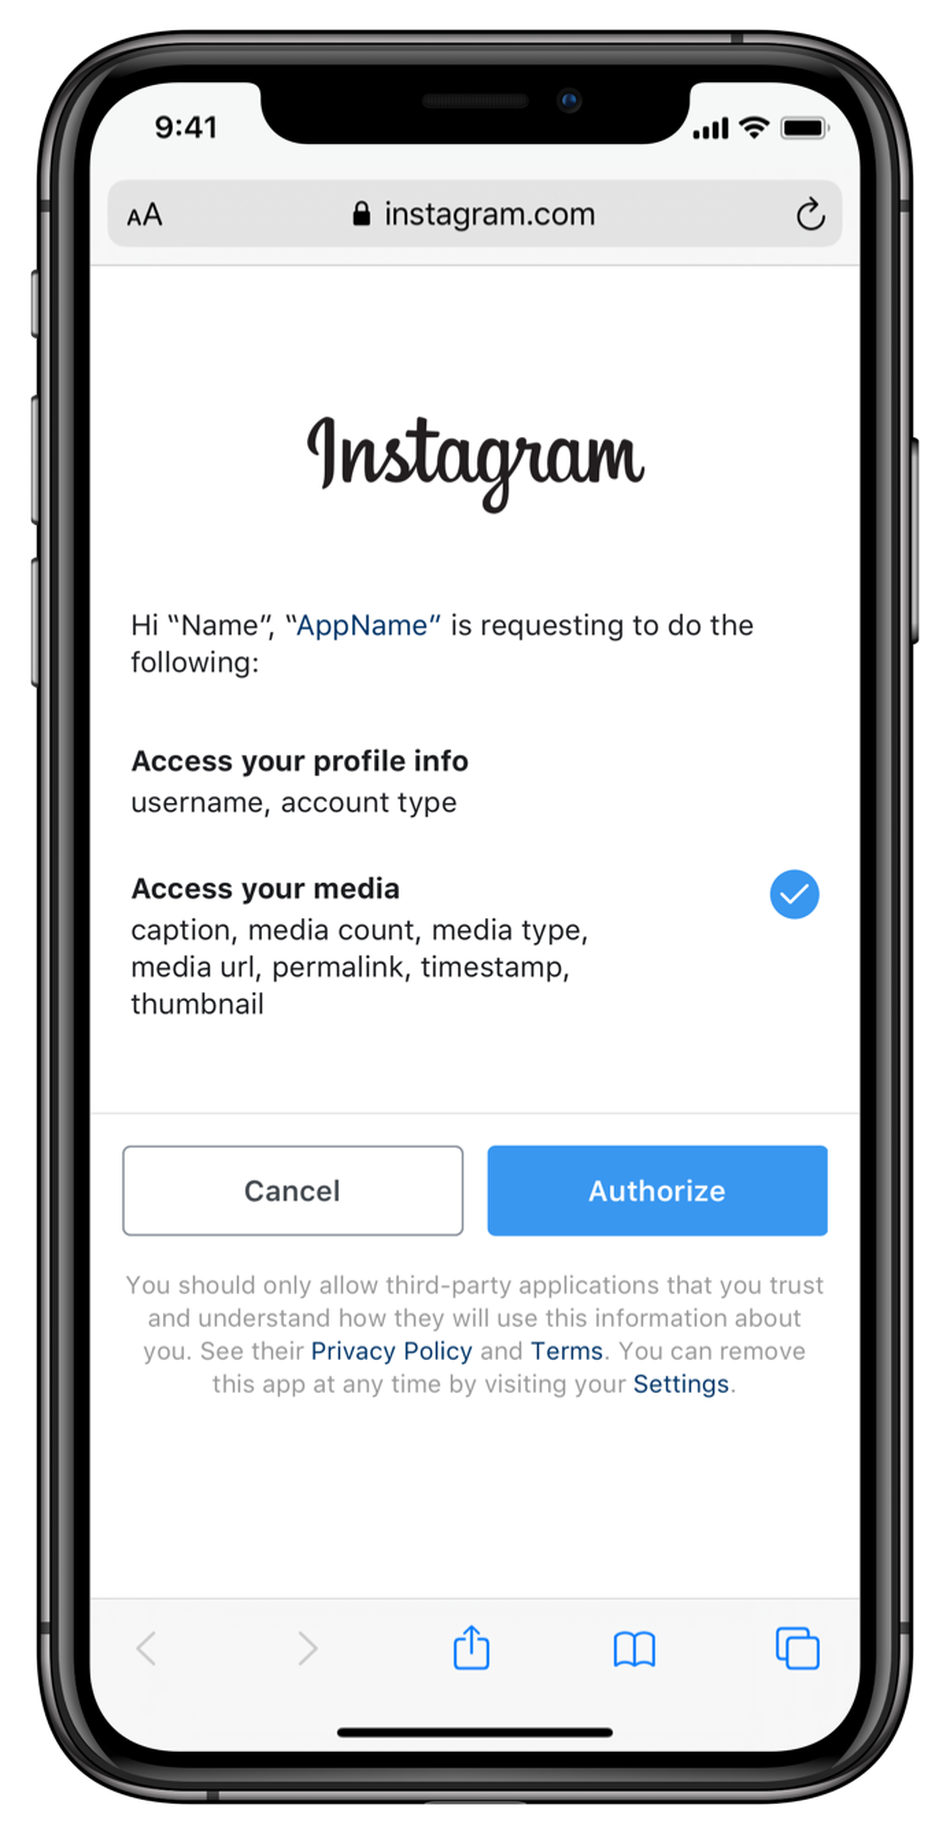 The Instagram new security feature will make it easier for people to control third-party apps. This new feature will be launched in chunks over the next six months.